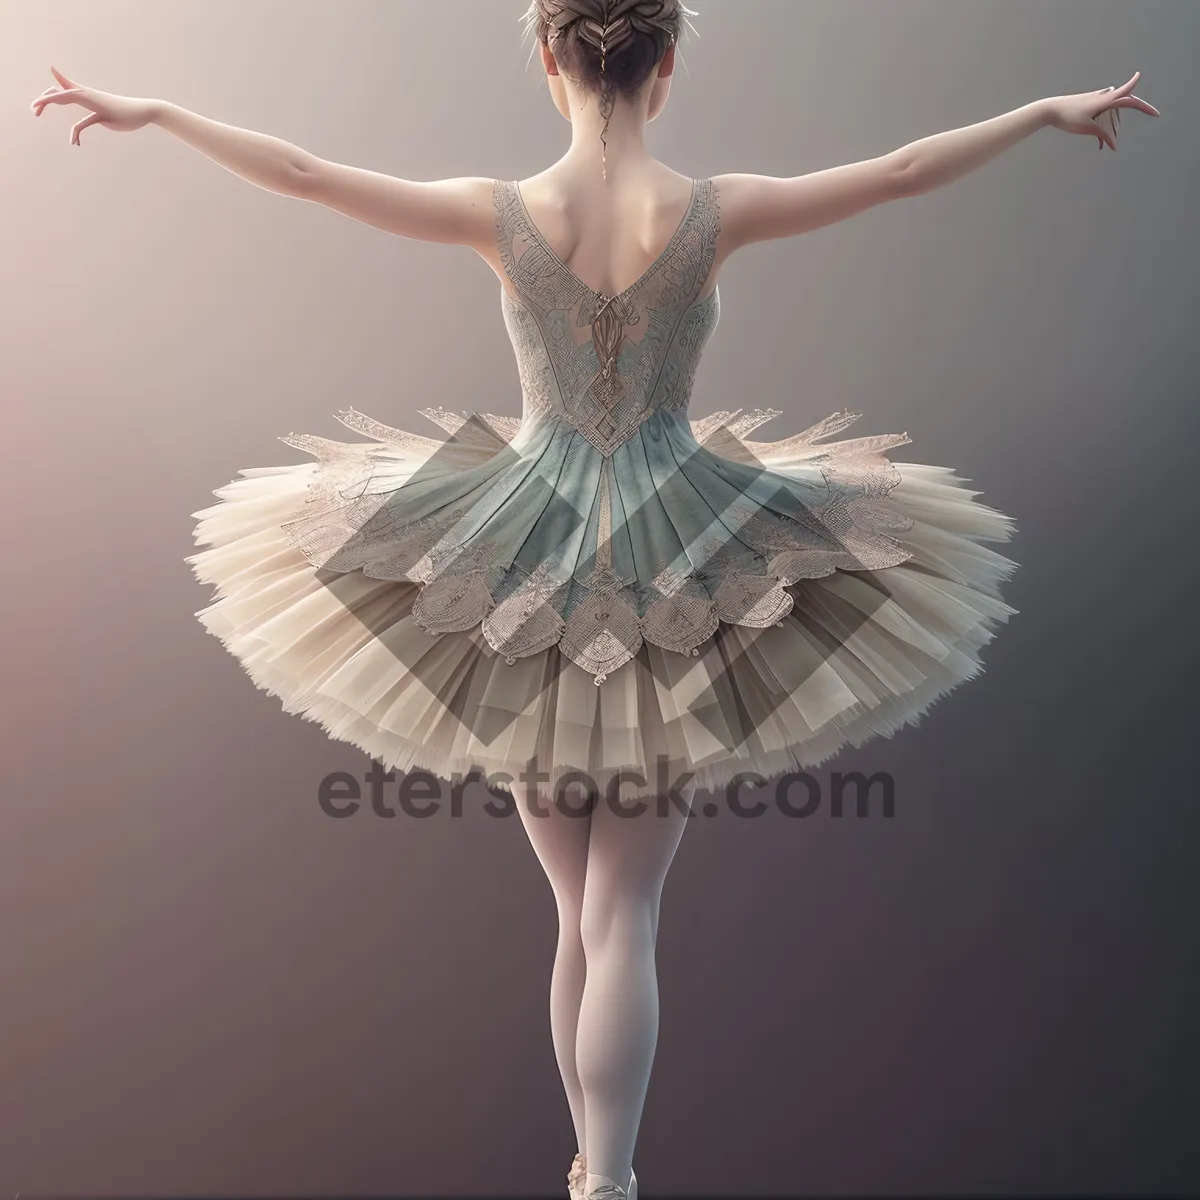 Picture of Graceful Ballerina Poses for Stunning Studio Portrait